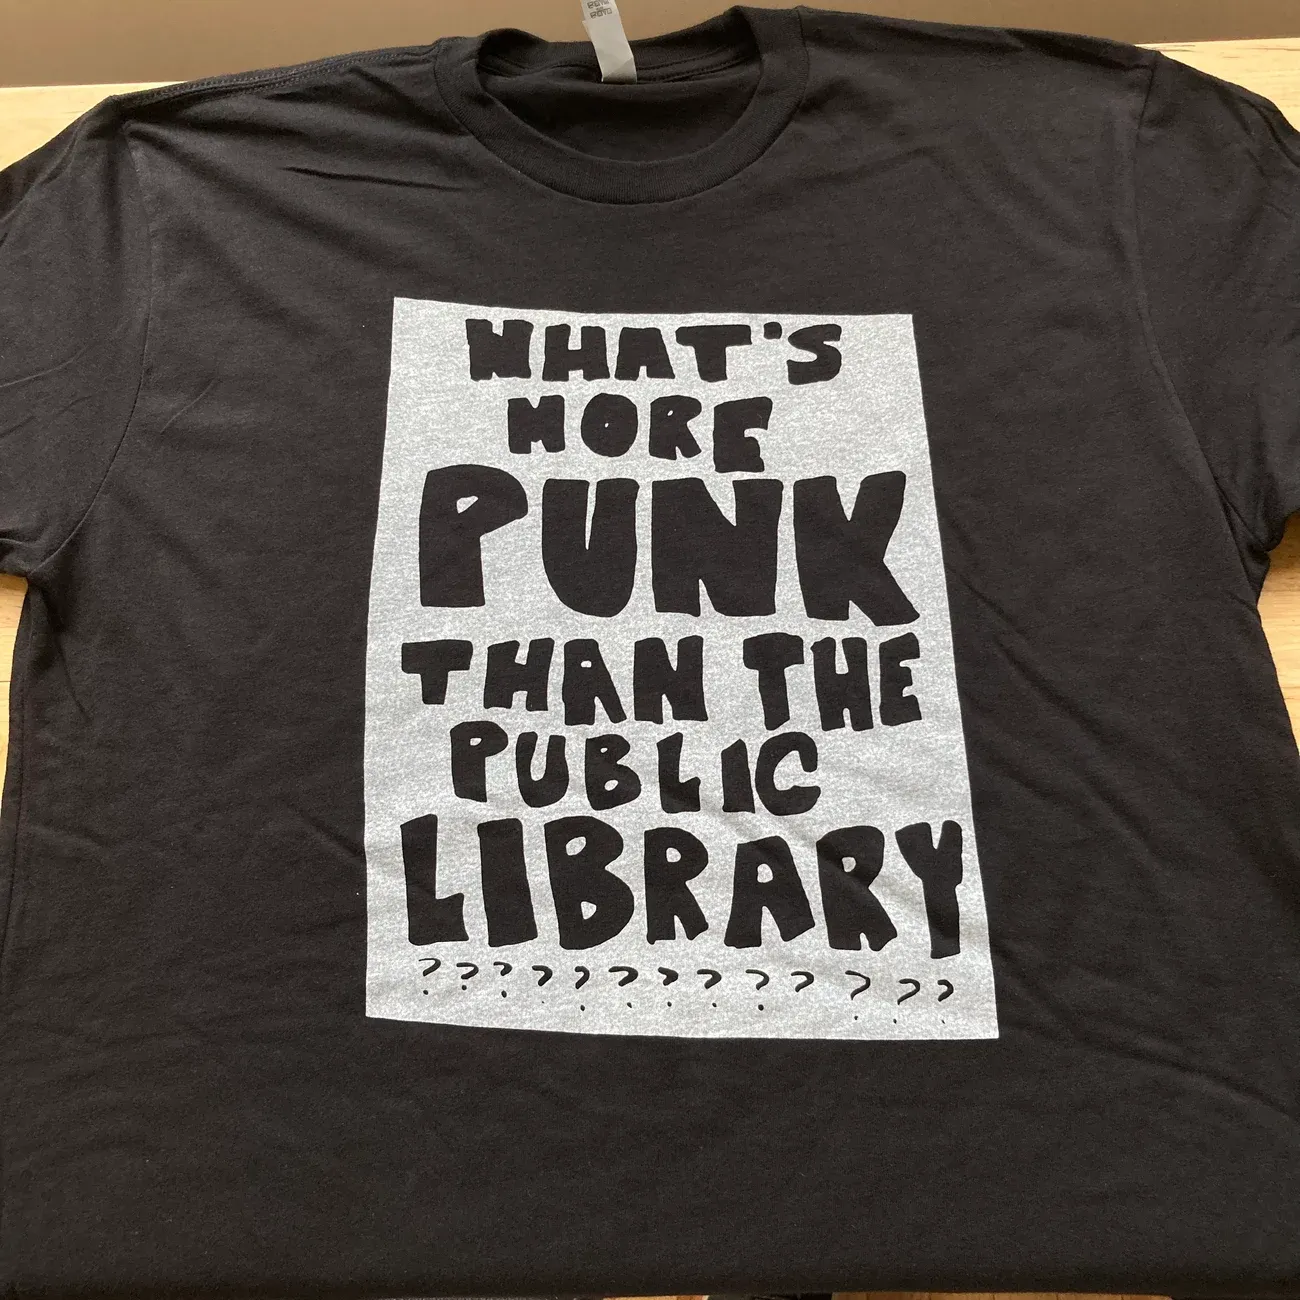 Black t-shirt with the printed message: WHAT'S MORE PUNK THAN THE PUBLIC LIBRARY???????